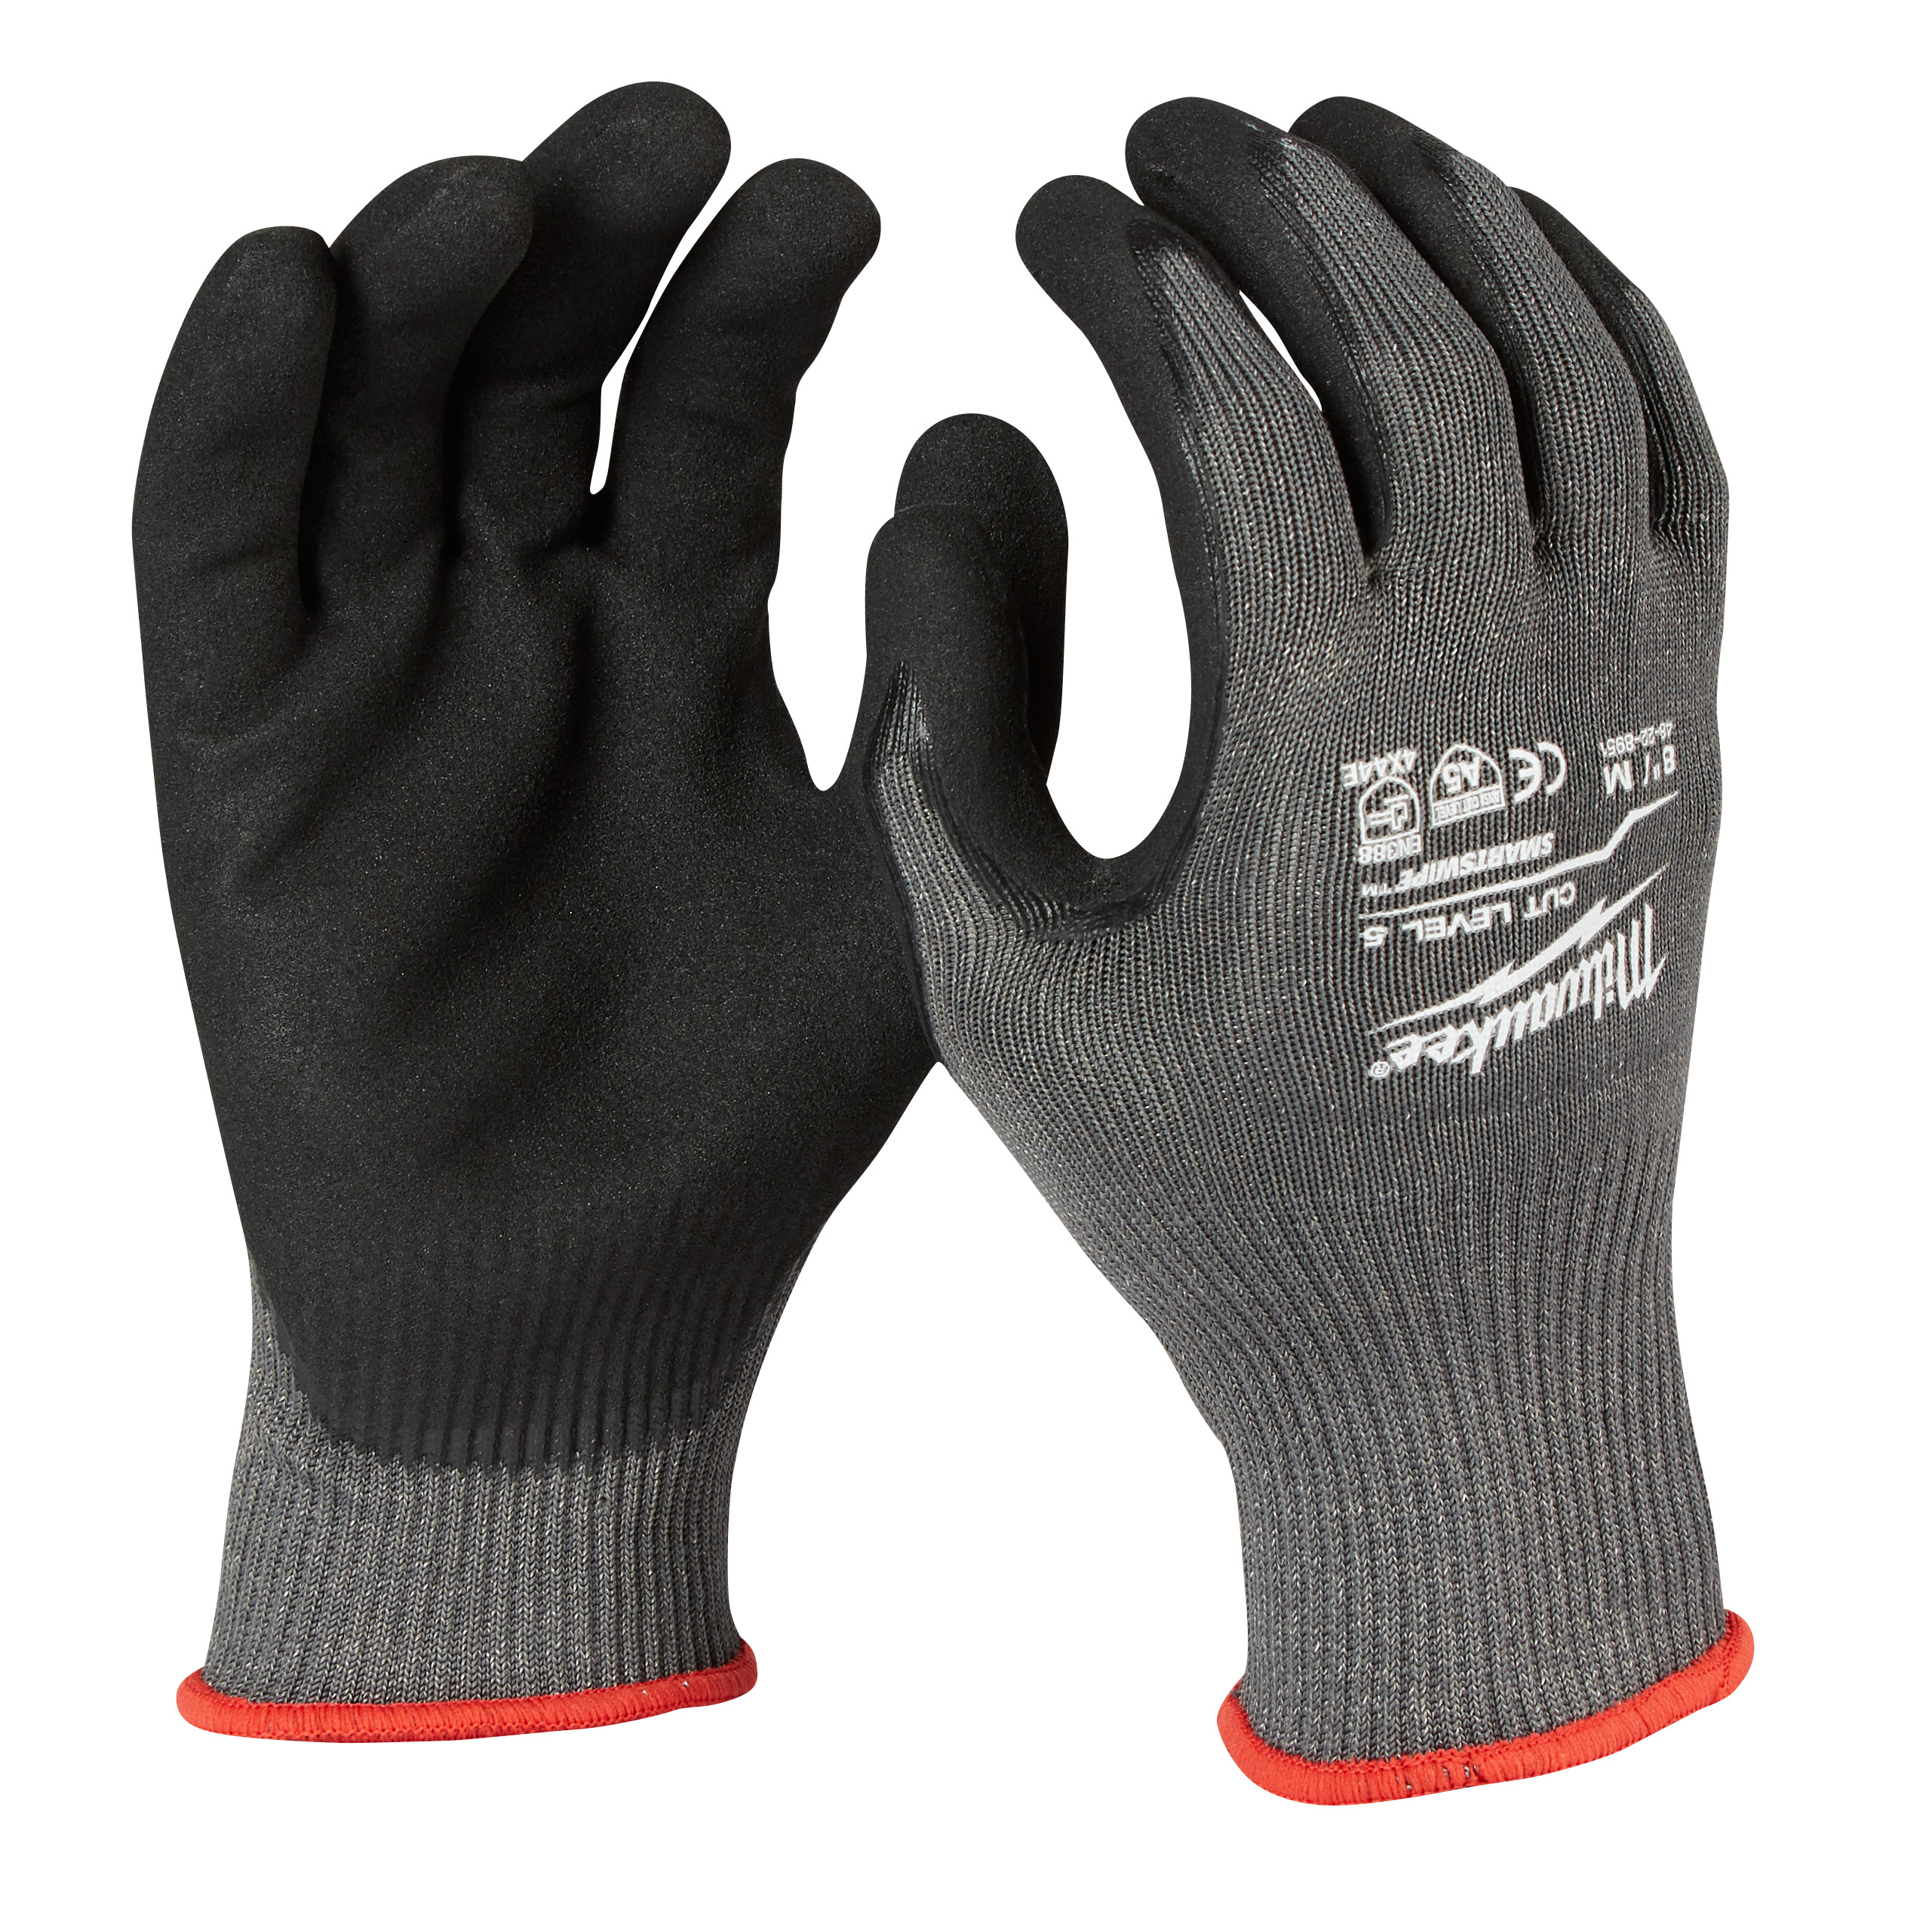 The Milwaukee Tool cut resistant dipped gloves are designed to provide ultimate durability, all–day comfort, and best in class dexterity for handling small objects. These gloves feature ANSI and EN Cut Level V protection to help prevent injuries from sharp objects on the jobsite. Additionally, Milwaukee gloves utilize a double dipped nitrile grip to provide best in class protection from puncture and a dual layer for added durability. Smartswipe™ fingertips & palms provide full access to touchscreen devices without removing the gloves and also feature high dexterity fingertips to maximize control when handling small objects.